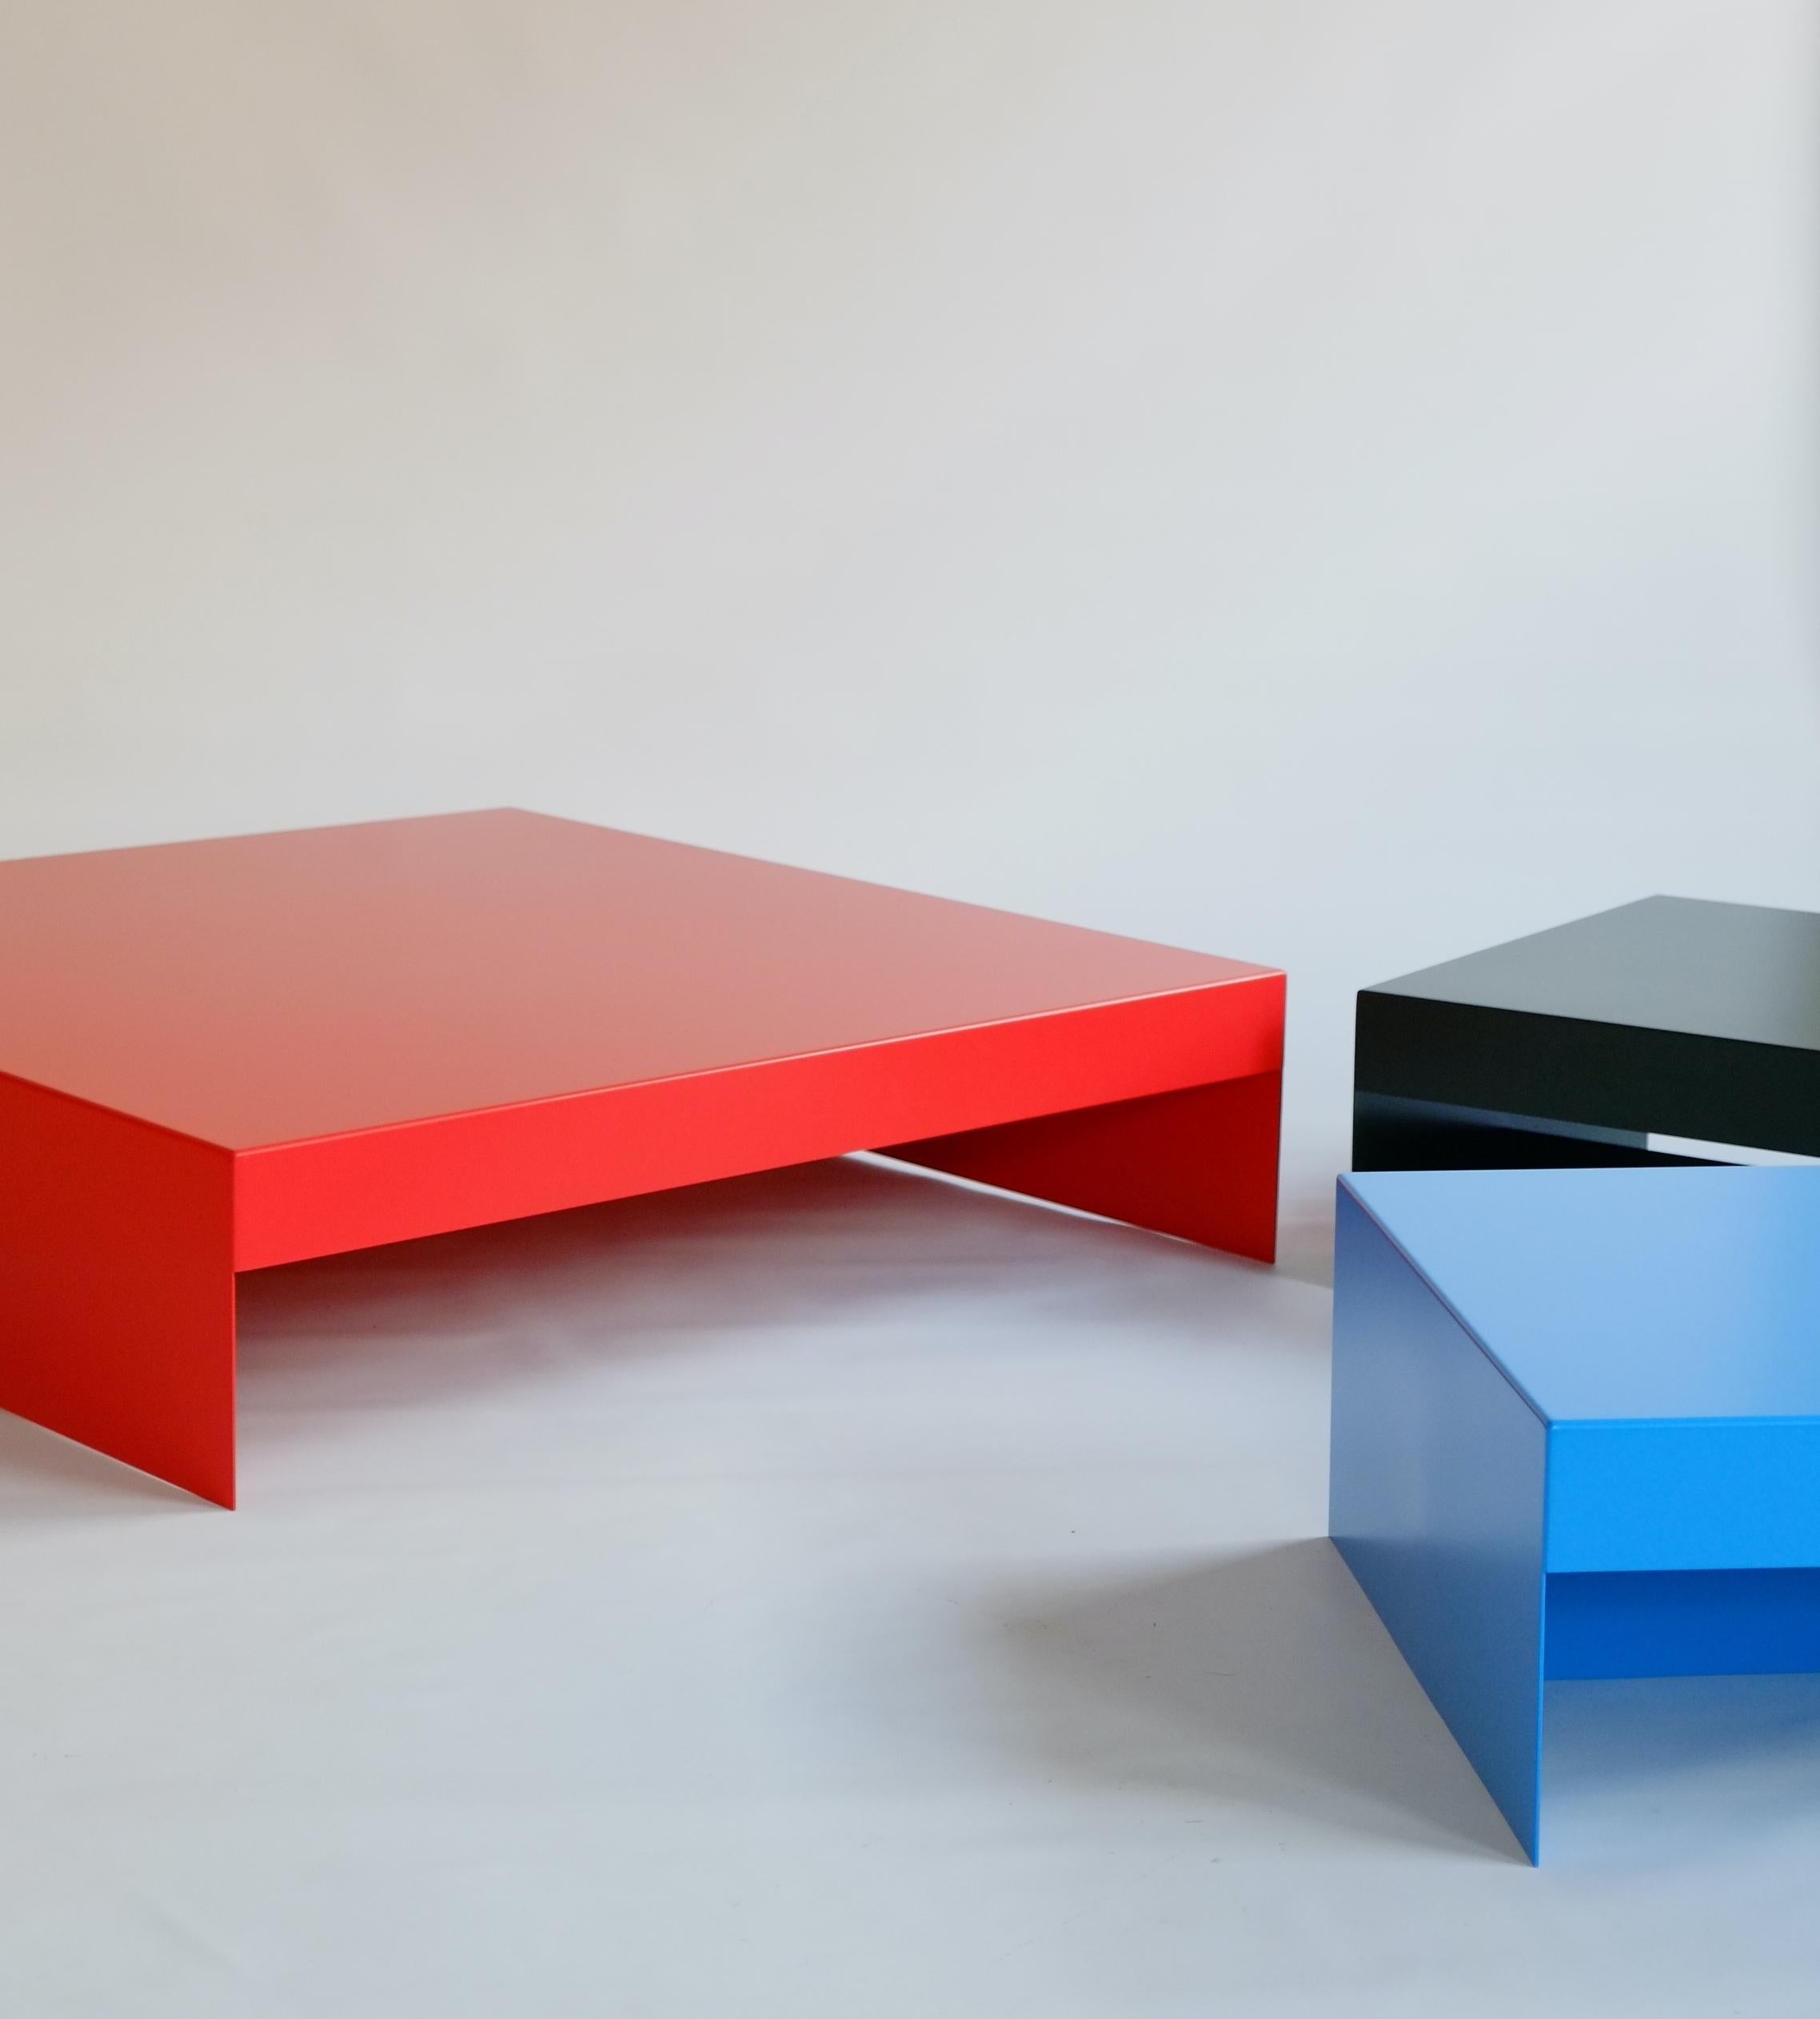 Red Single Form Square Aluminium Coffee Table - Indoor / Outdoor / Customisable For Sale 5